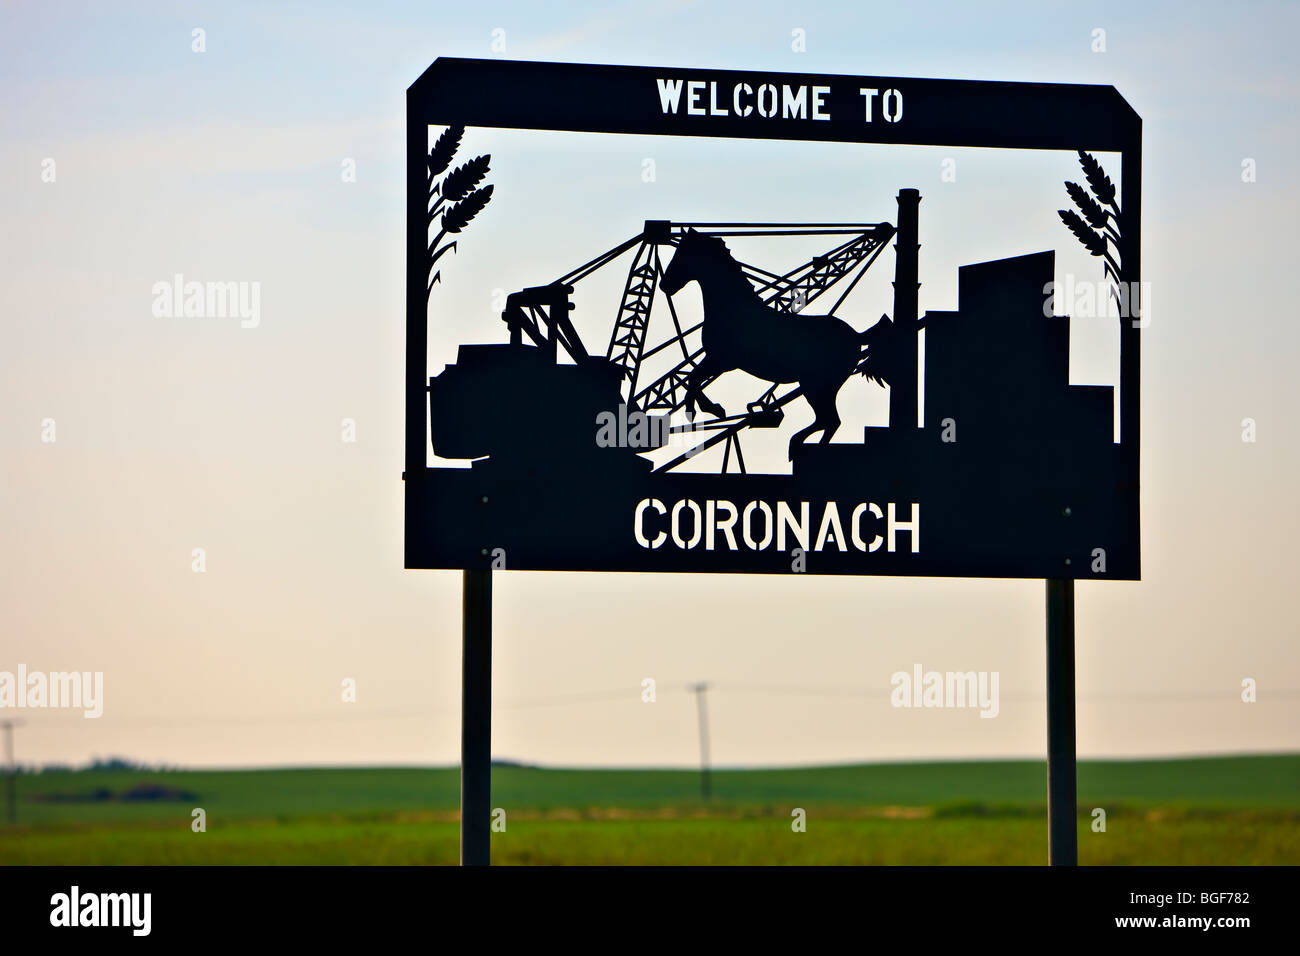 Welcome sign in the town of Coronach in the Big Muddy Badlands regions of Southern Saskatchewan, Canada. Stock Photo